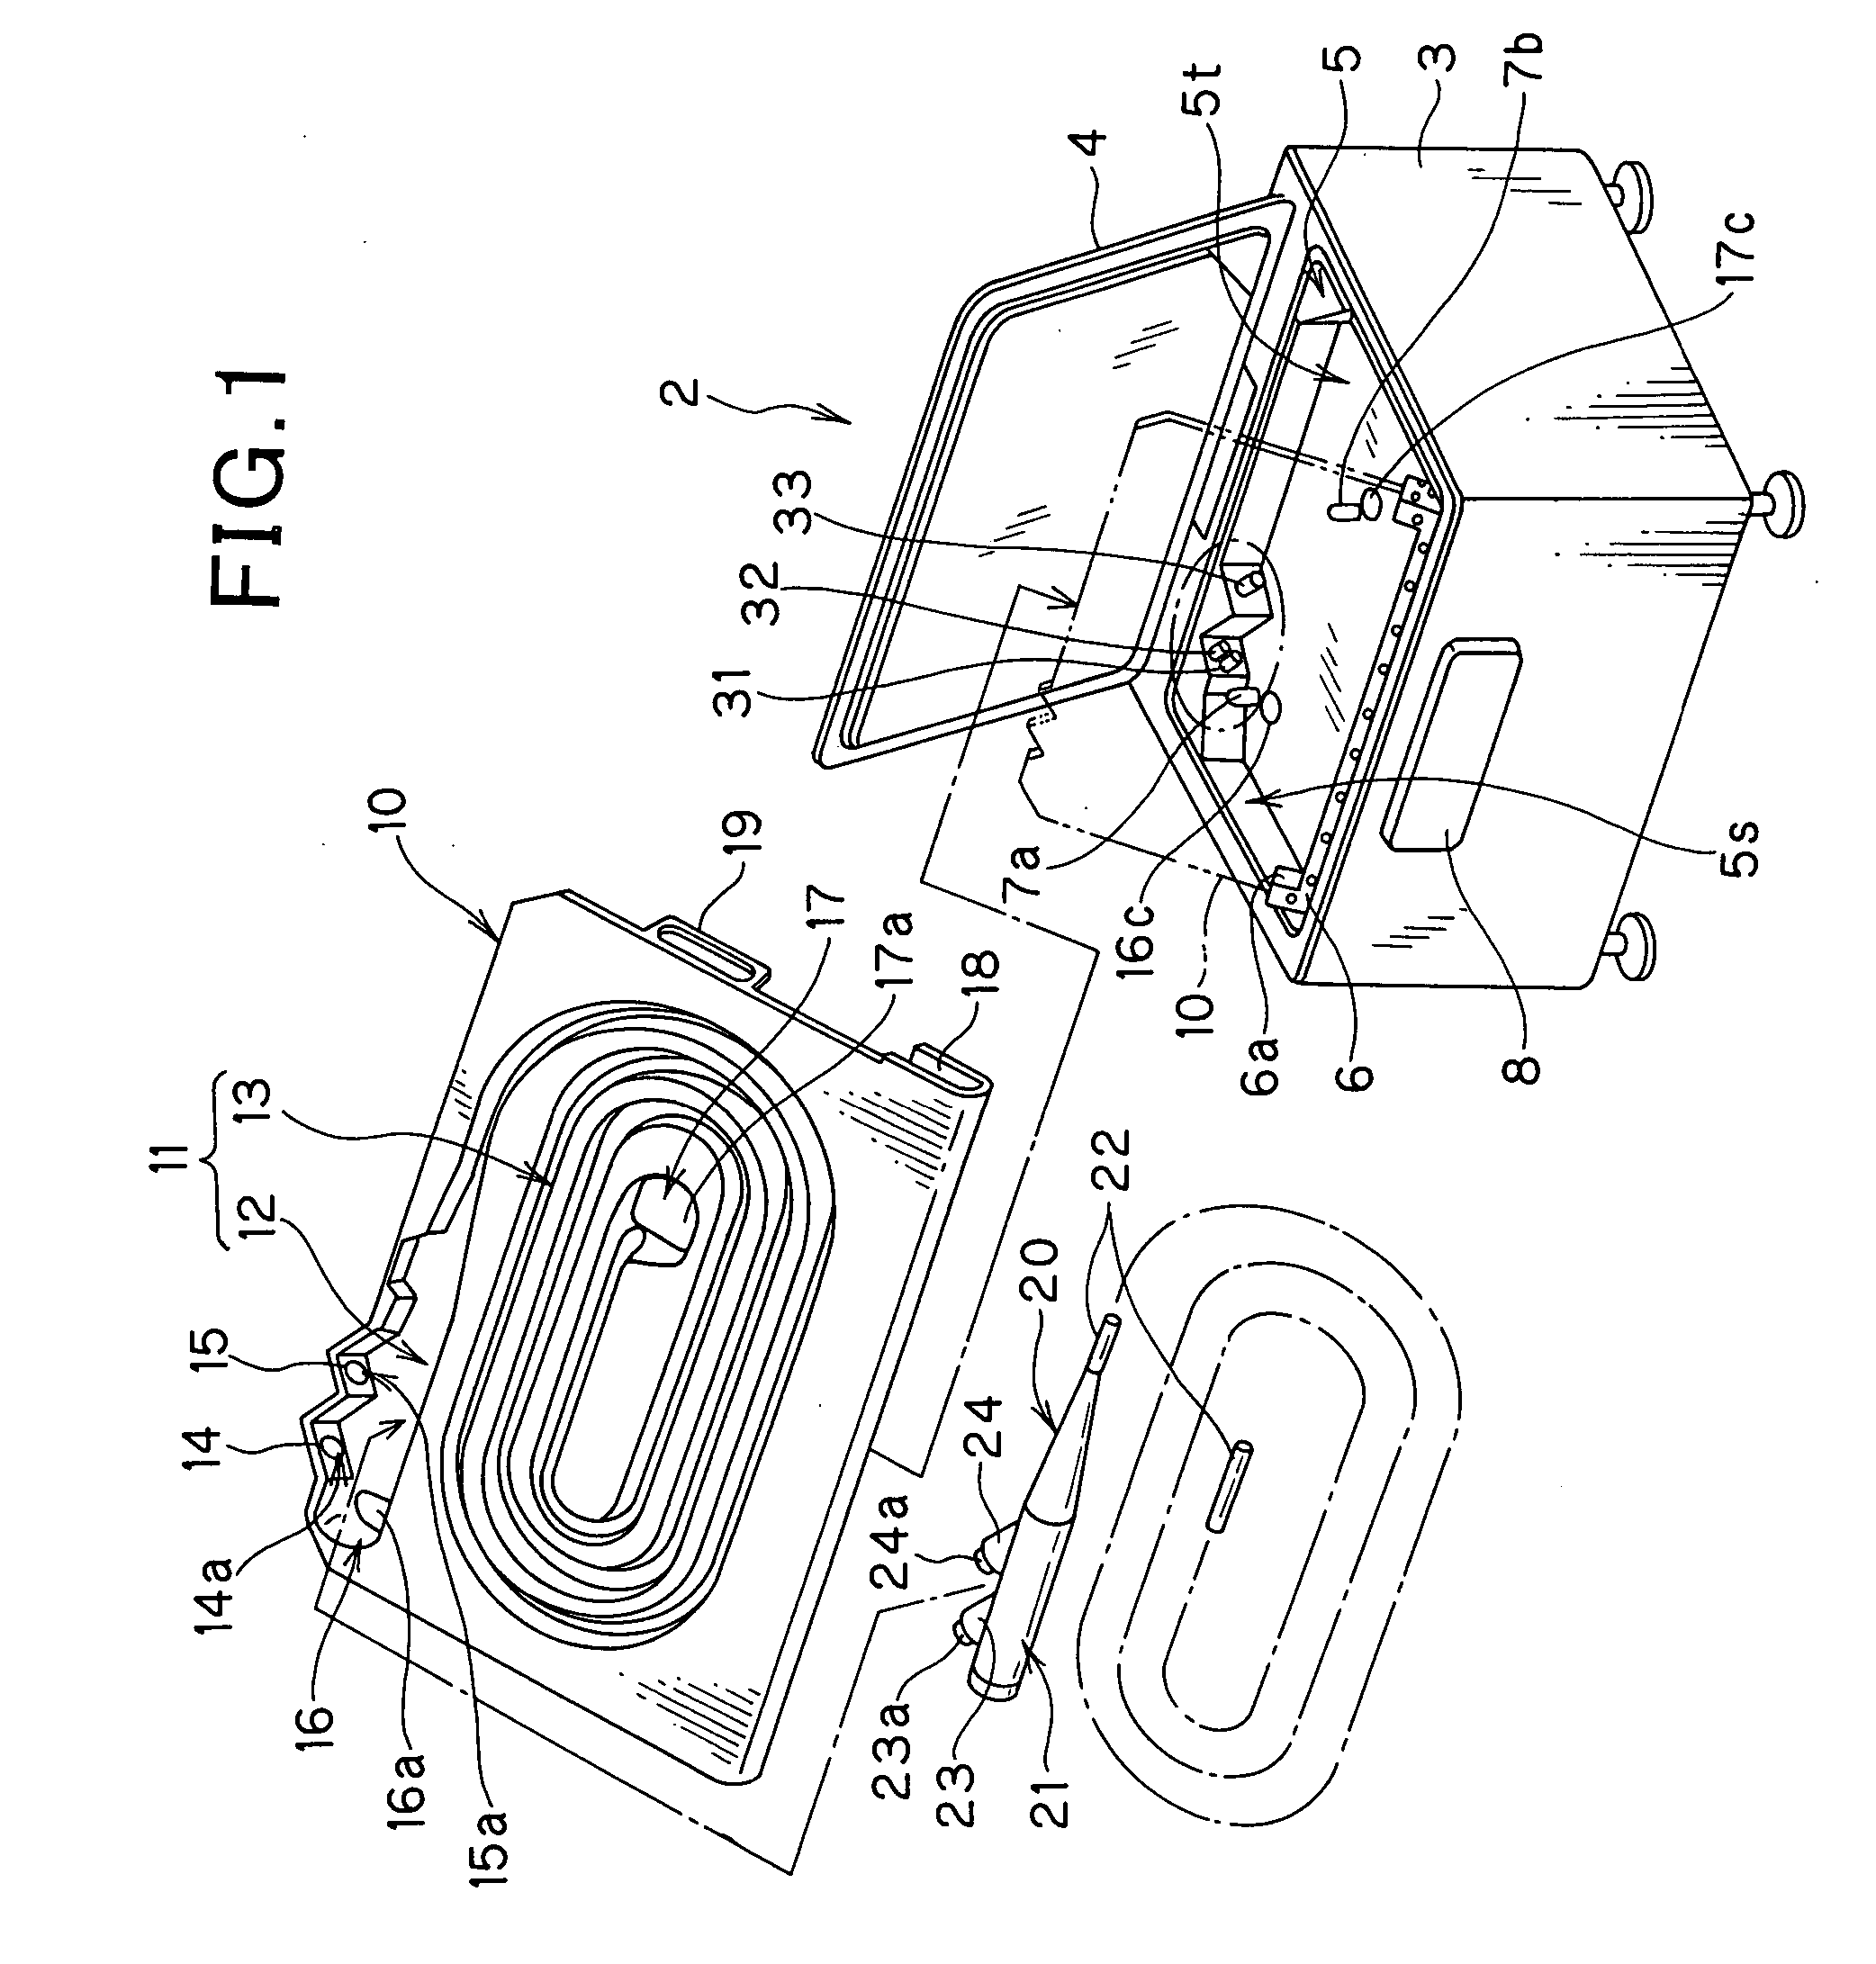 Apparatus for washing and disinfecting endoscope and brush unit for washing ducts of endoscope